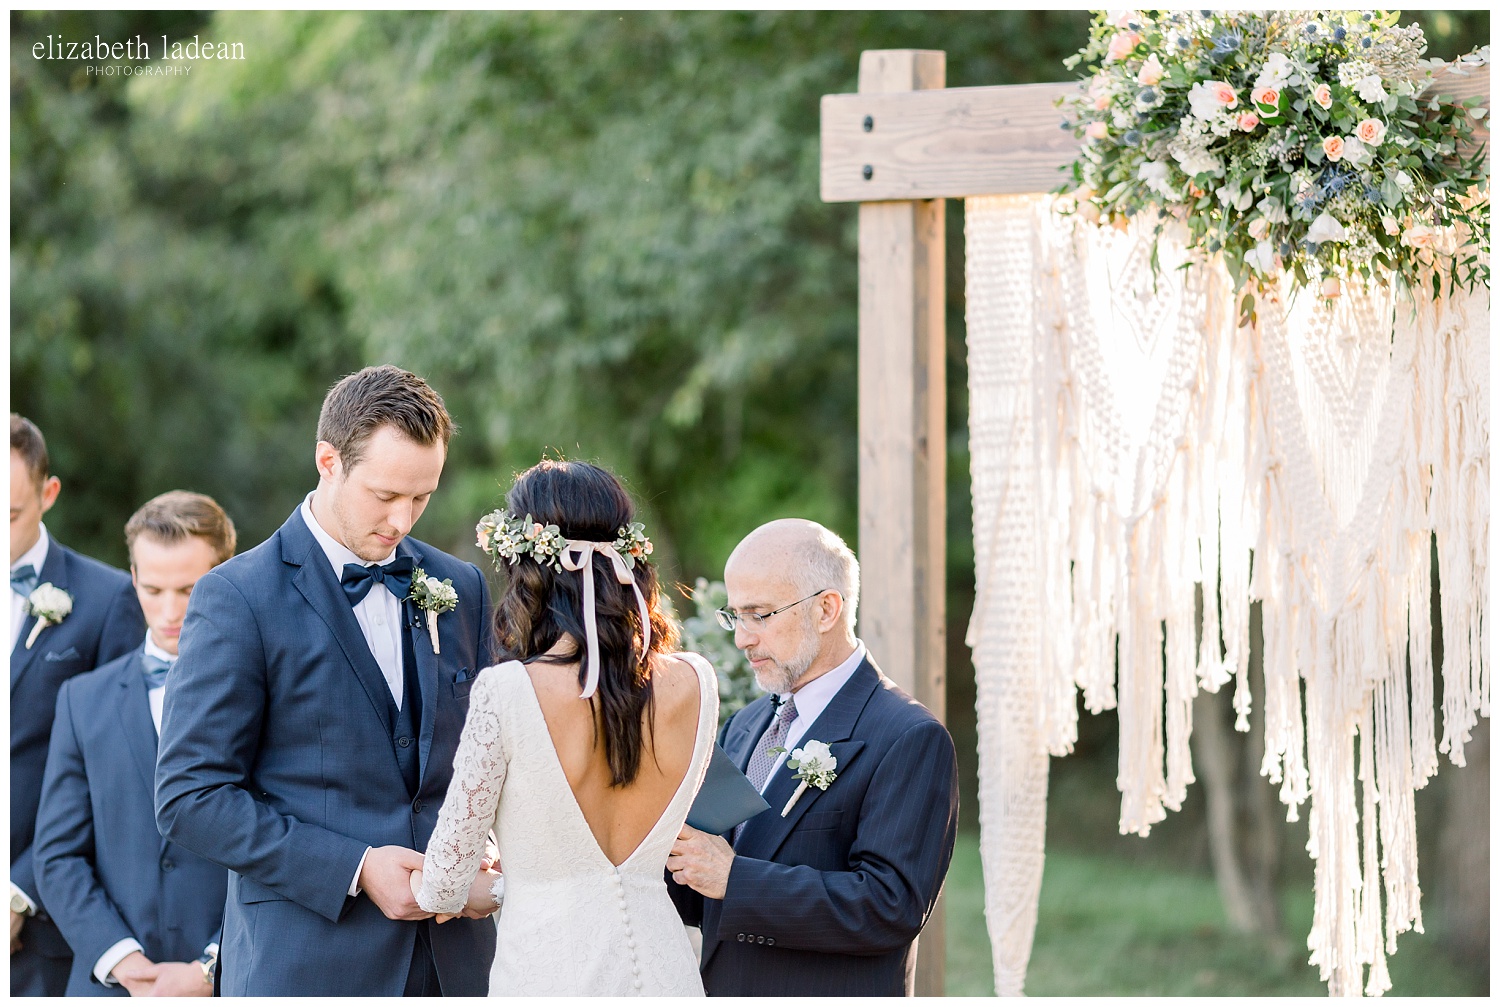 Willow-Creek-Blush-and-Blues-Outdoor-Wedding-Photography-S+Z2018-elizabeth-ladean-photography-photo_0572.jpg